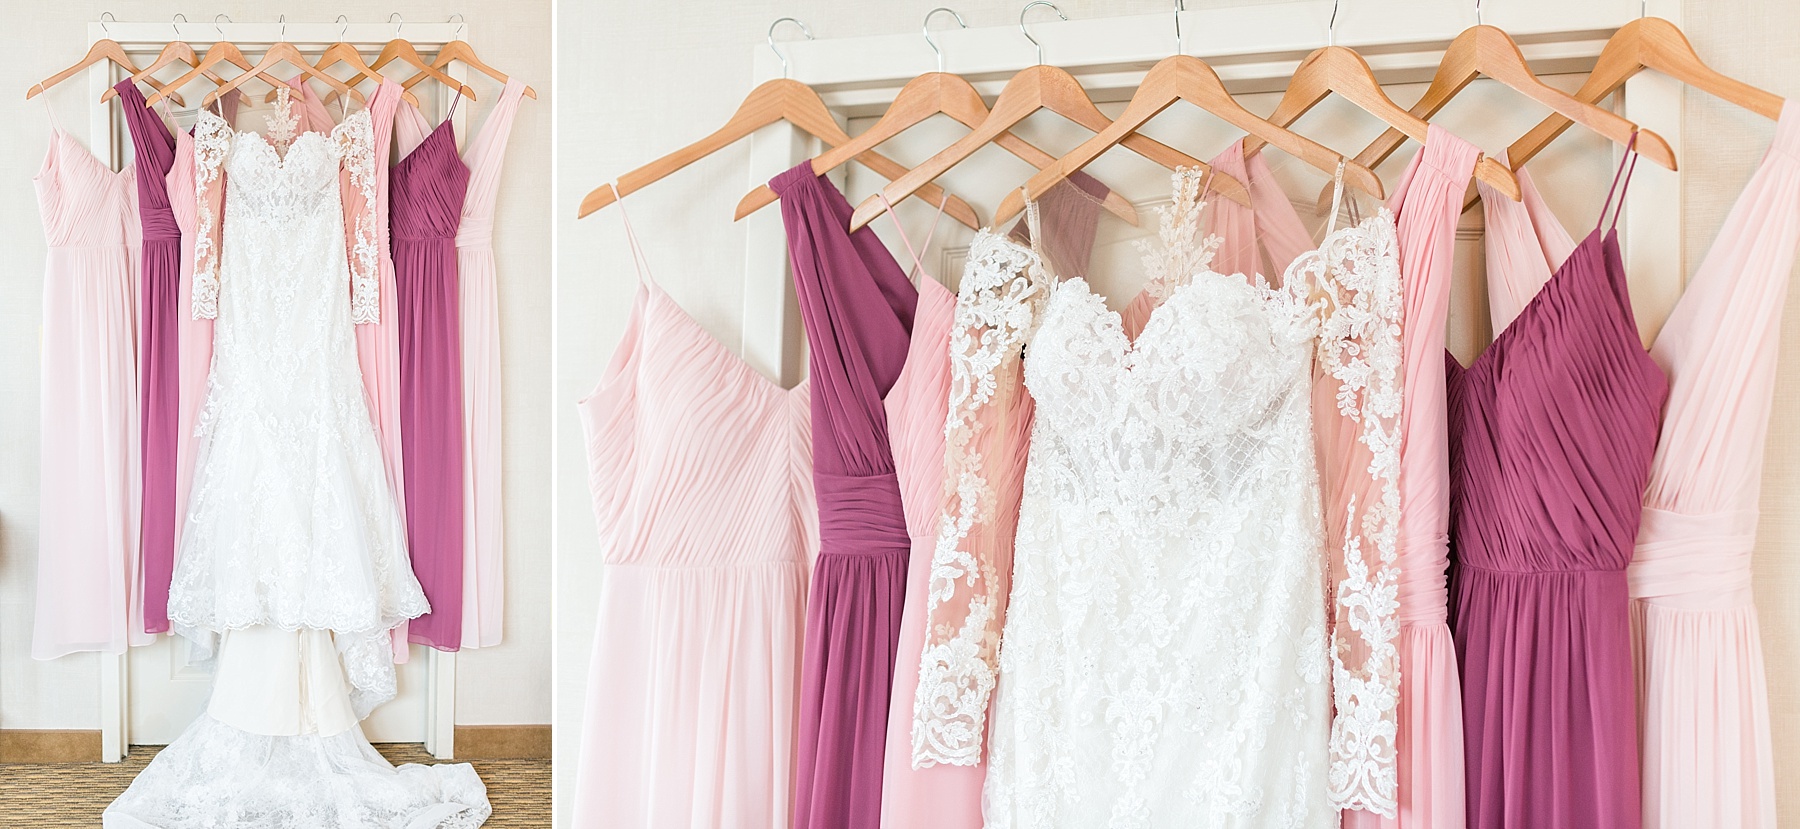 pink dresses for bridesmaids before Maryland wedding